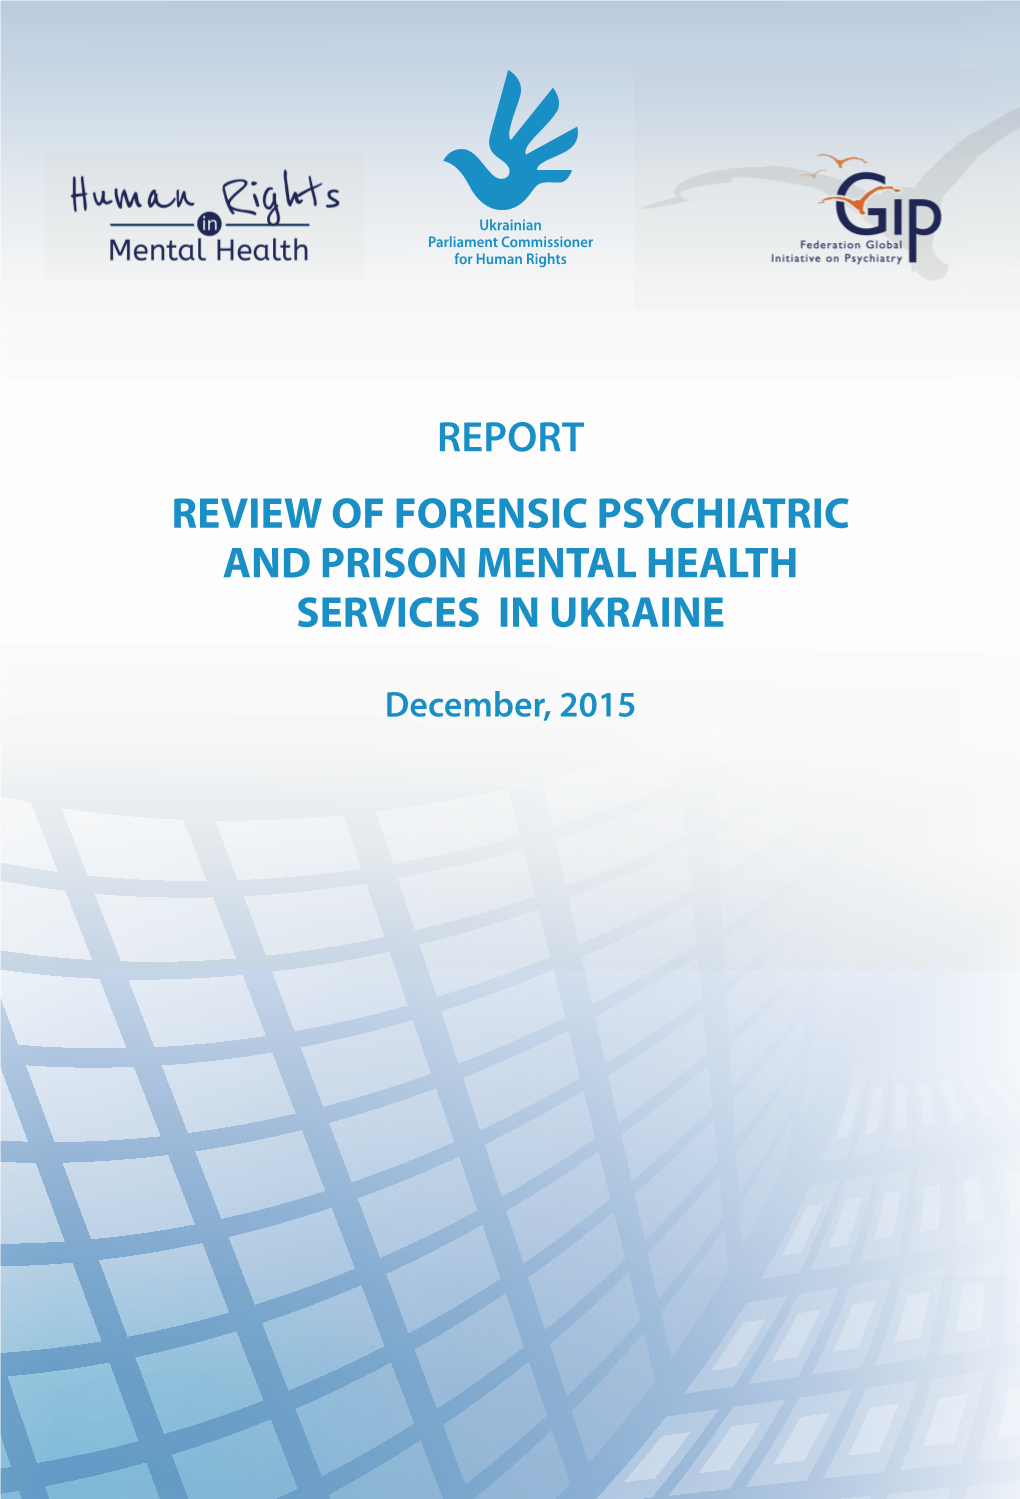 Report Review of Forensic Psychiatric and Prison Mental Health Services in Ukraine